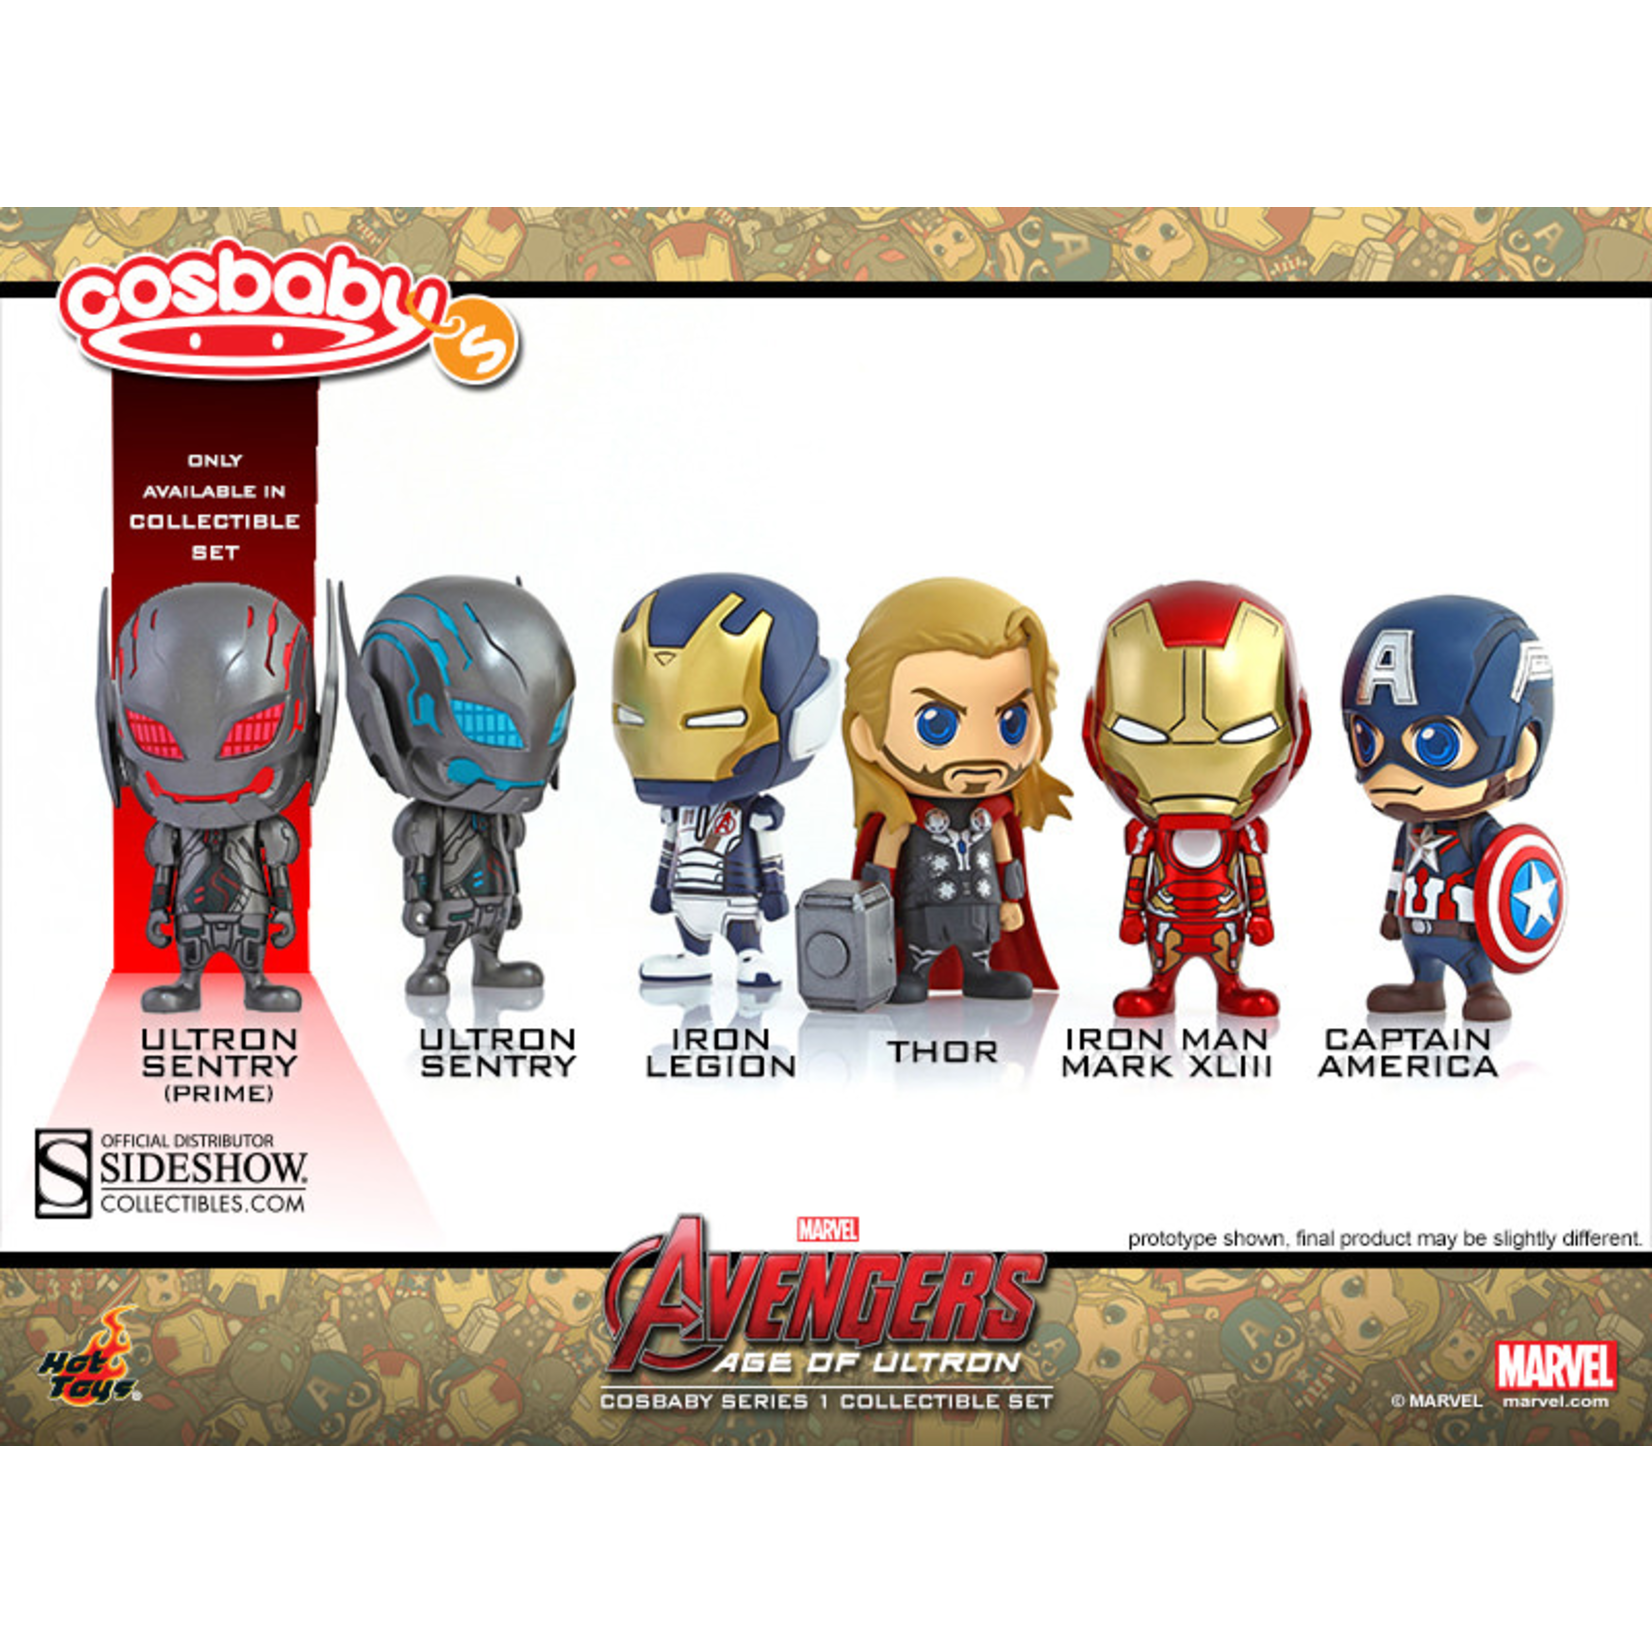 Hot Toys Hot Toys - Avengers: Age of Ultron Box Set CosBaby